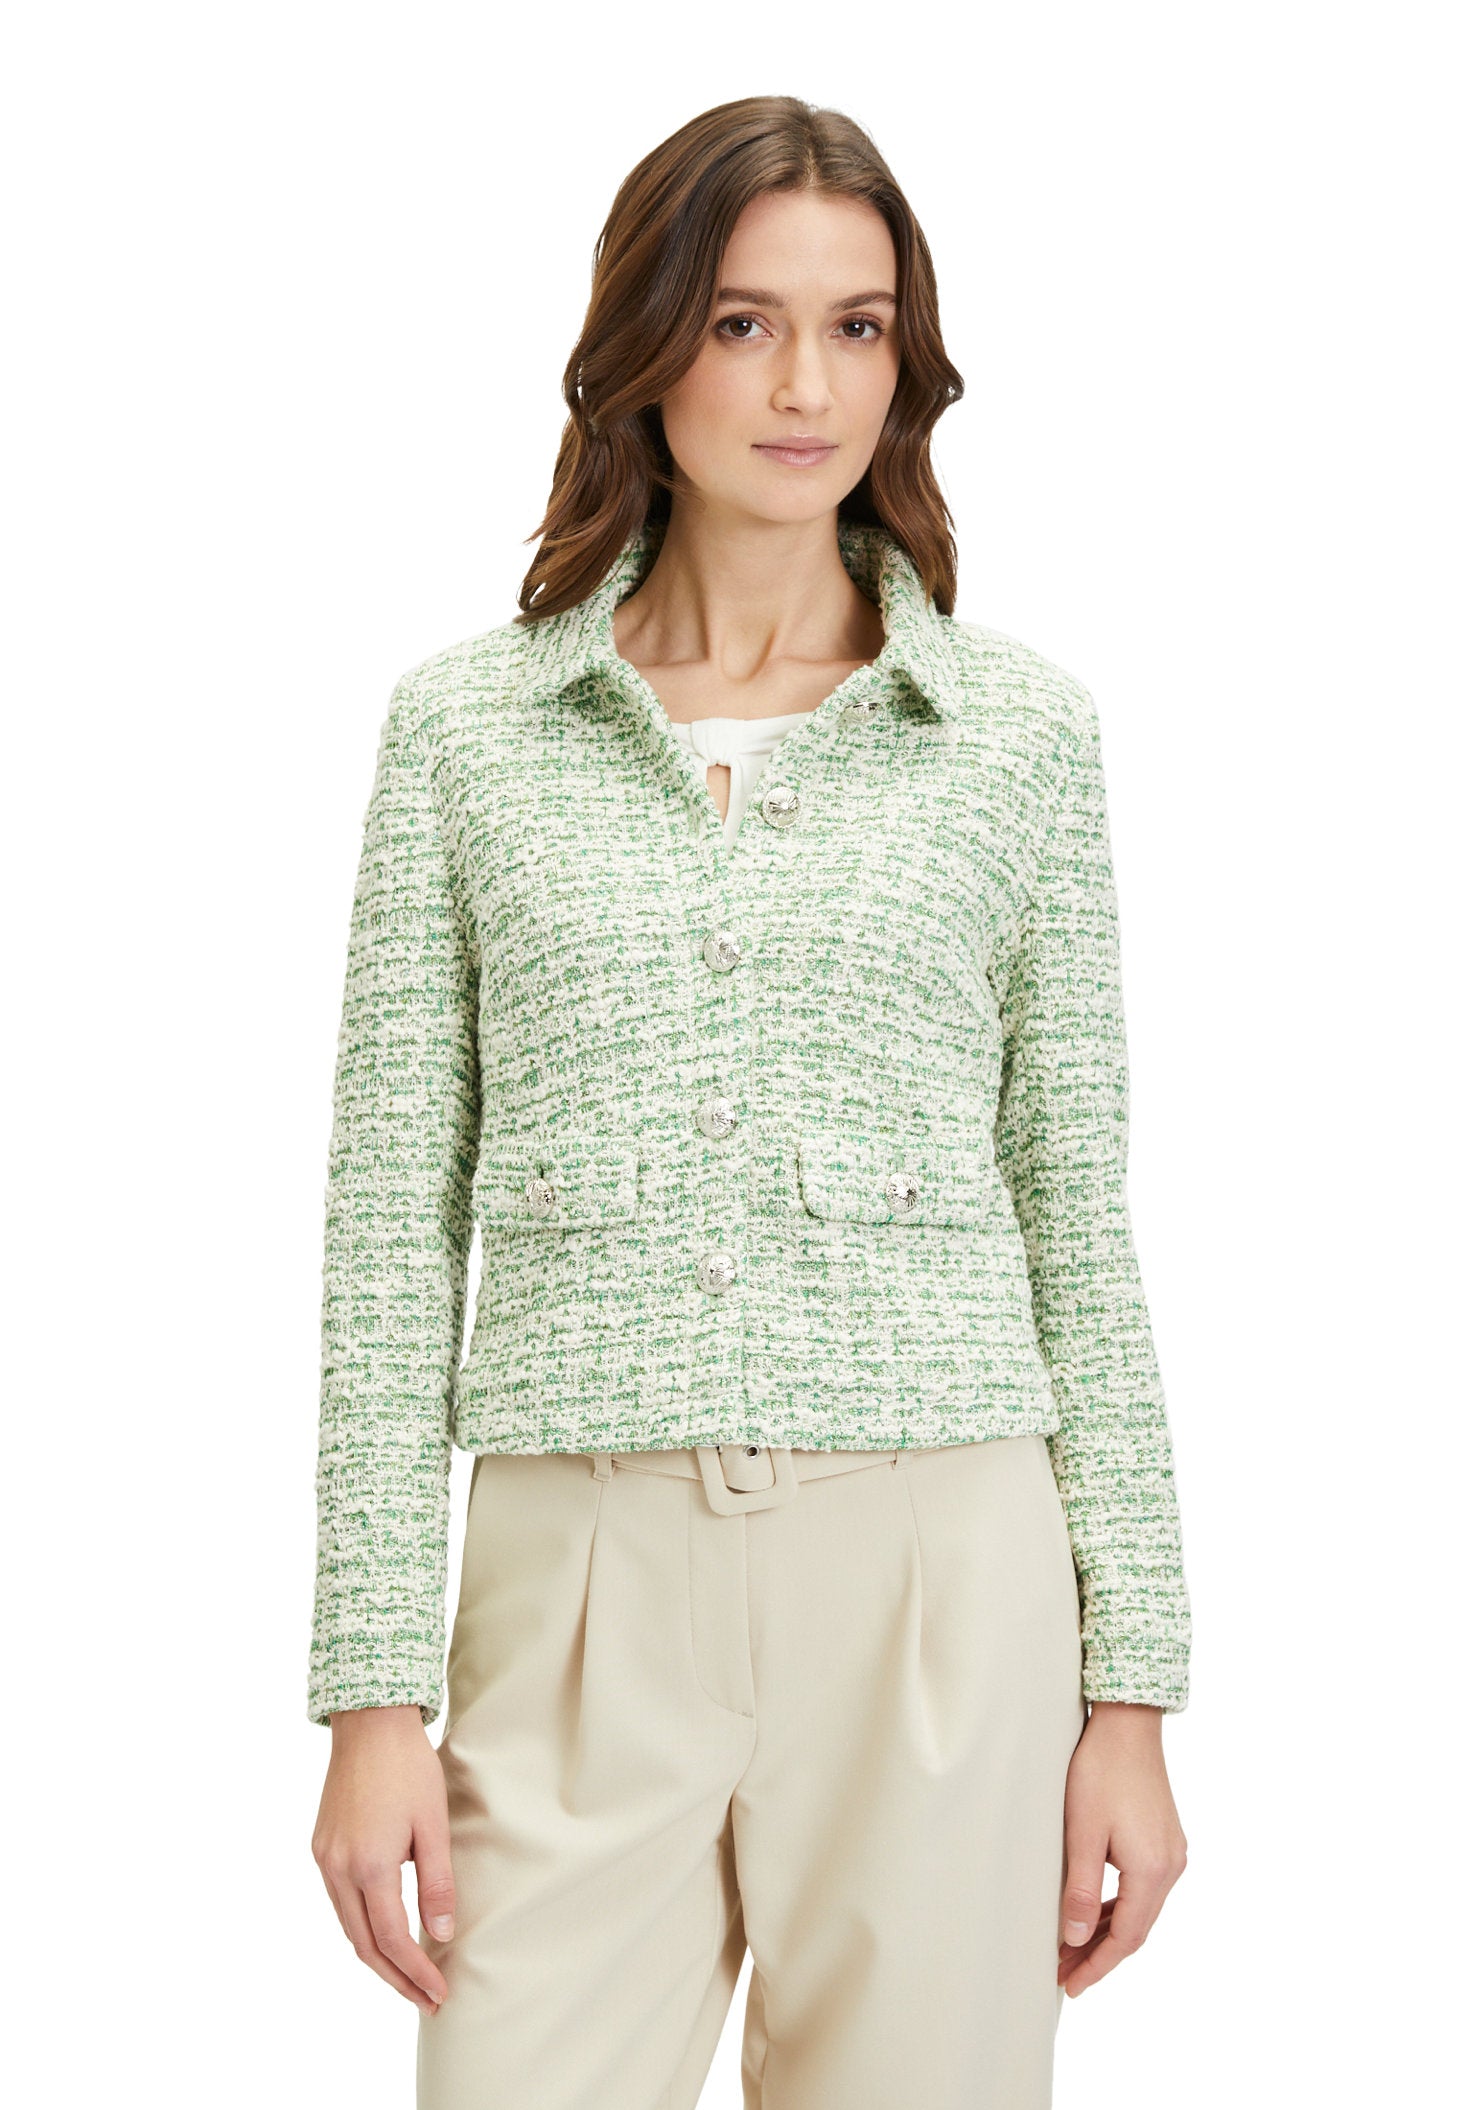 Green Twill Button Up Jacket_4342 2528_5811_03